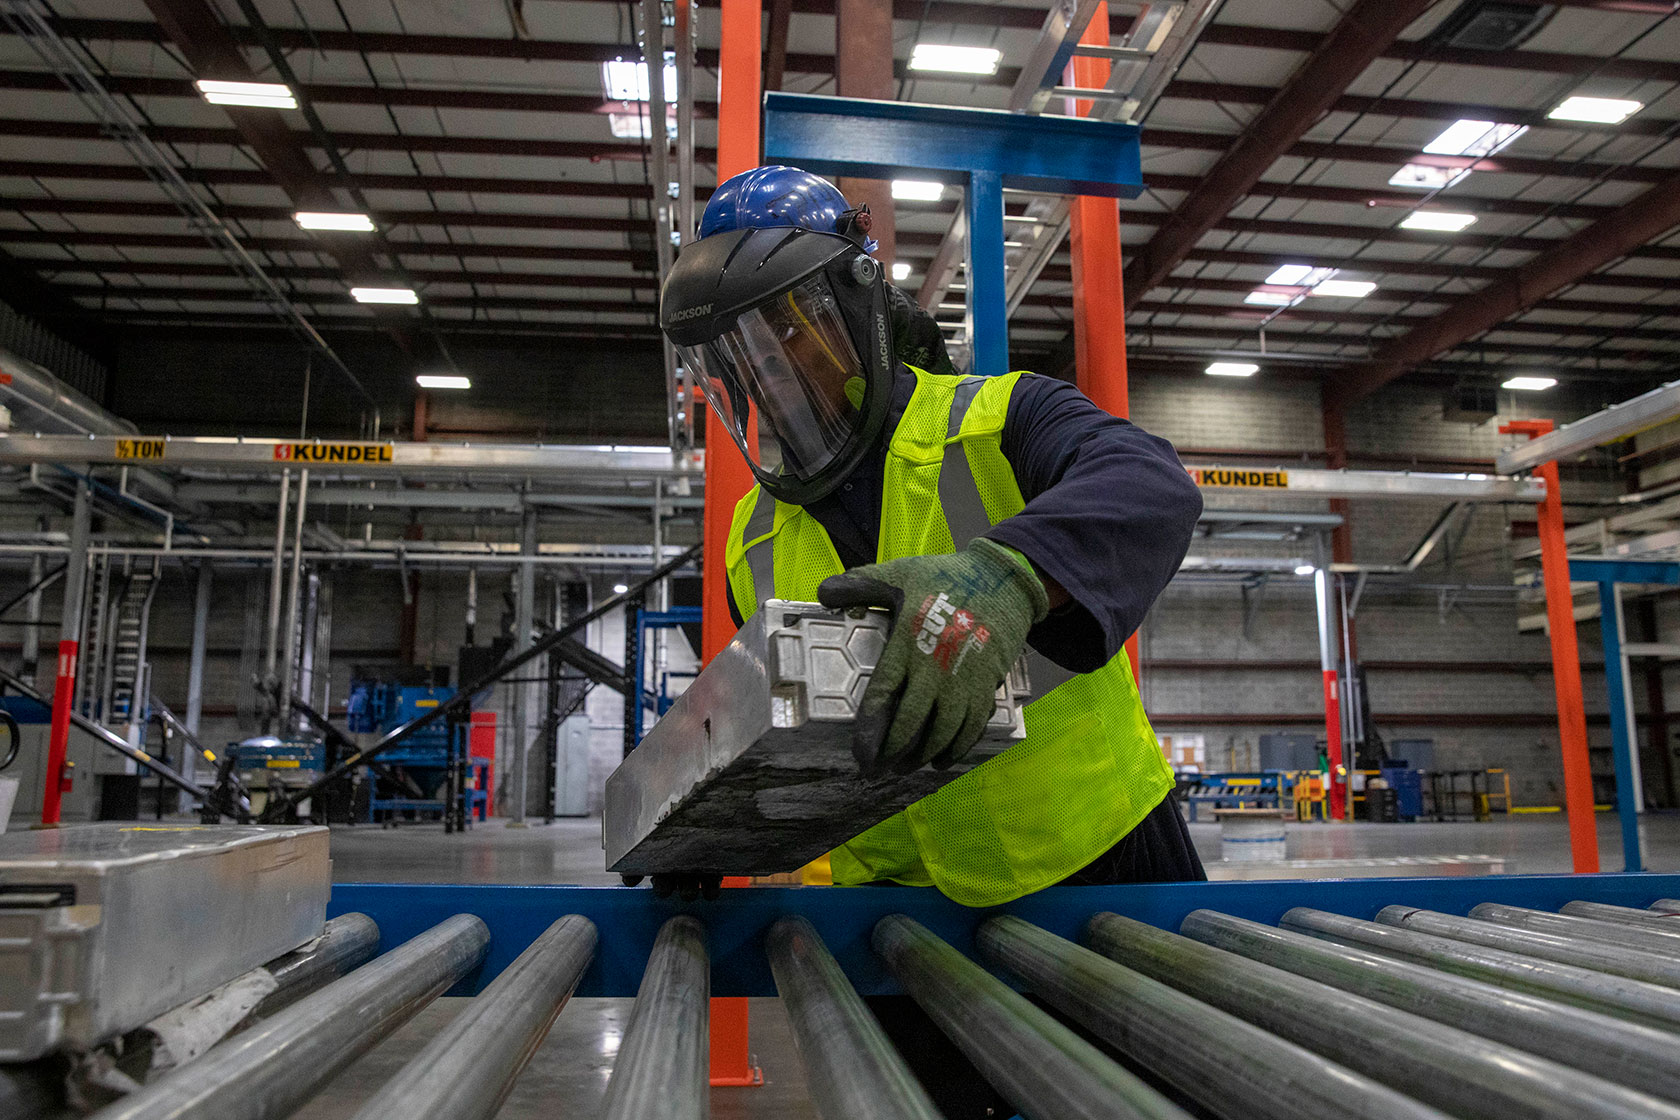 Photo shows a worker in a neon green vest and protective gear placing a battery on a metal conveyor belt with overhead lights in the background